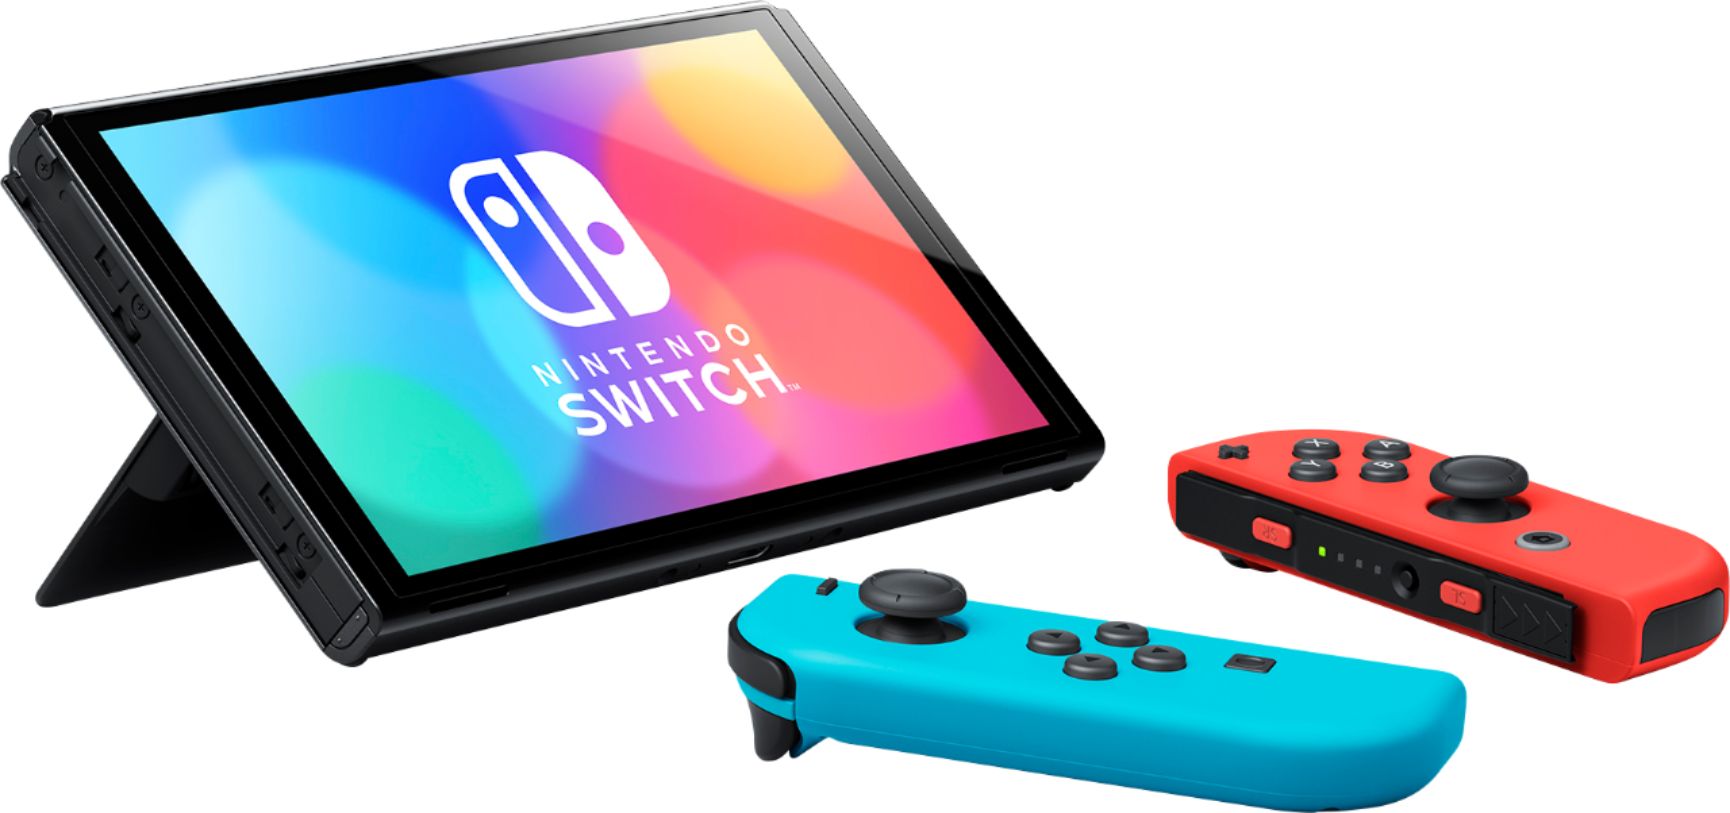 2021 New Nintendo Switch OLED Model Neon Red & Blue Joy Con 64GB Console HD Screen & LAN-Port Dock with Super Mario Maker 2 And Mytrix Joystick Caps & Screen Protector